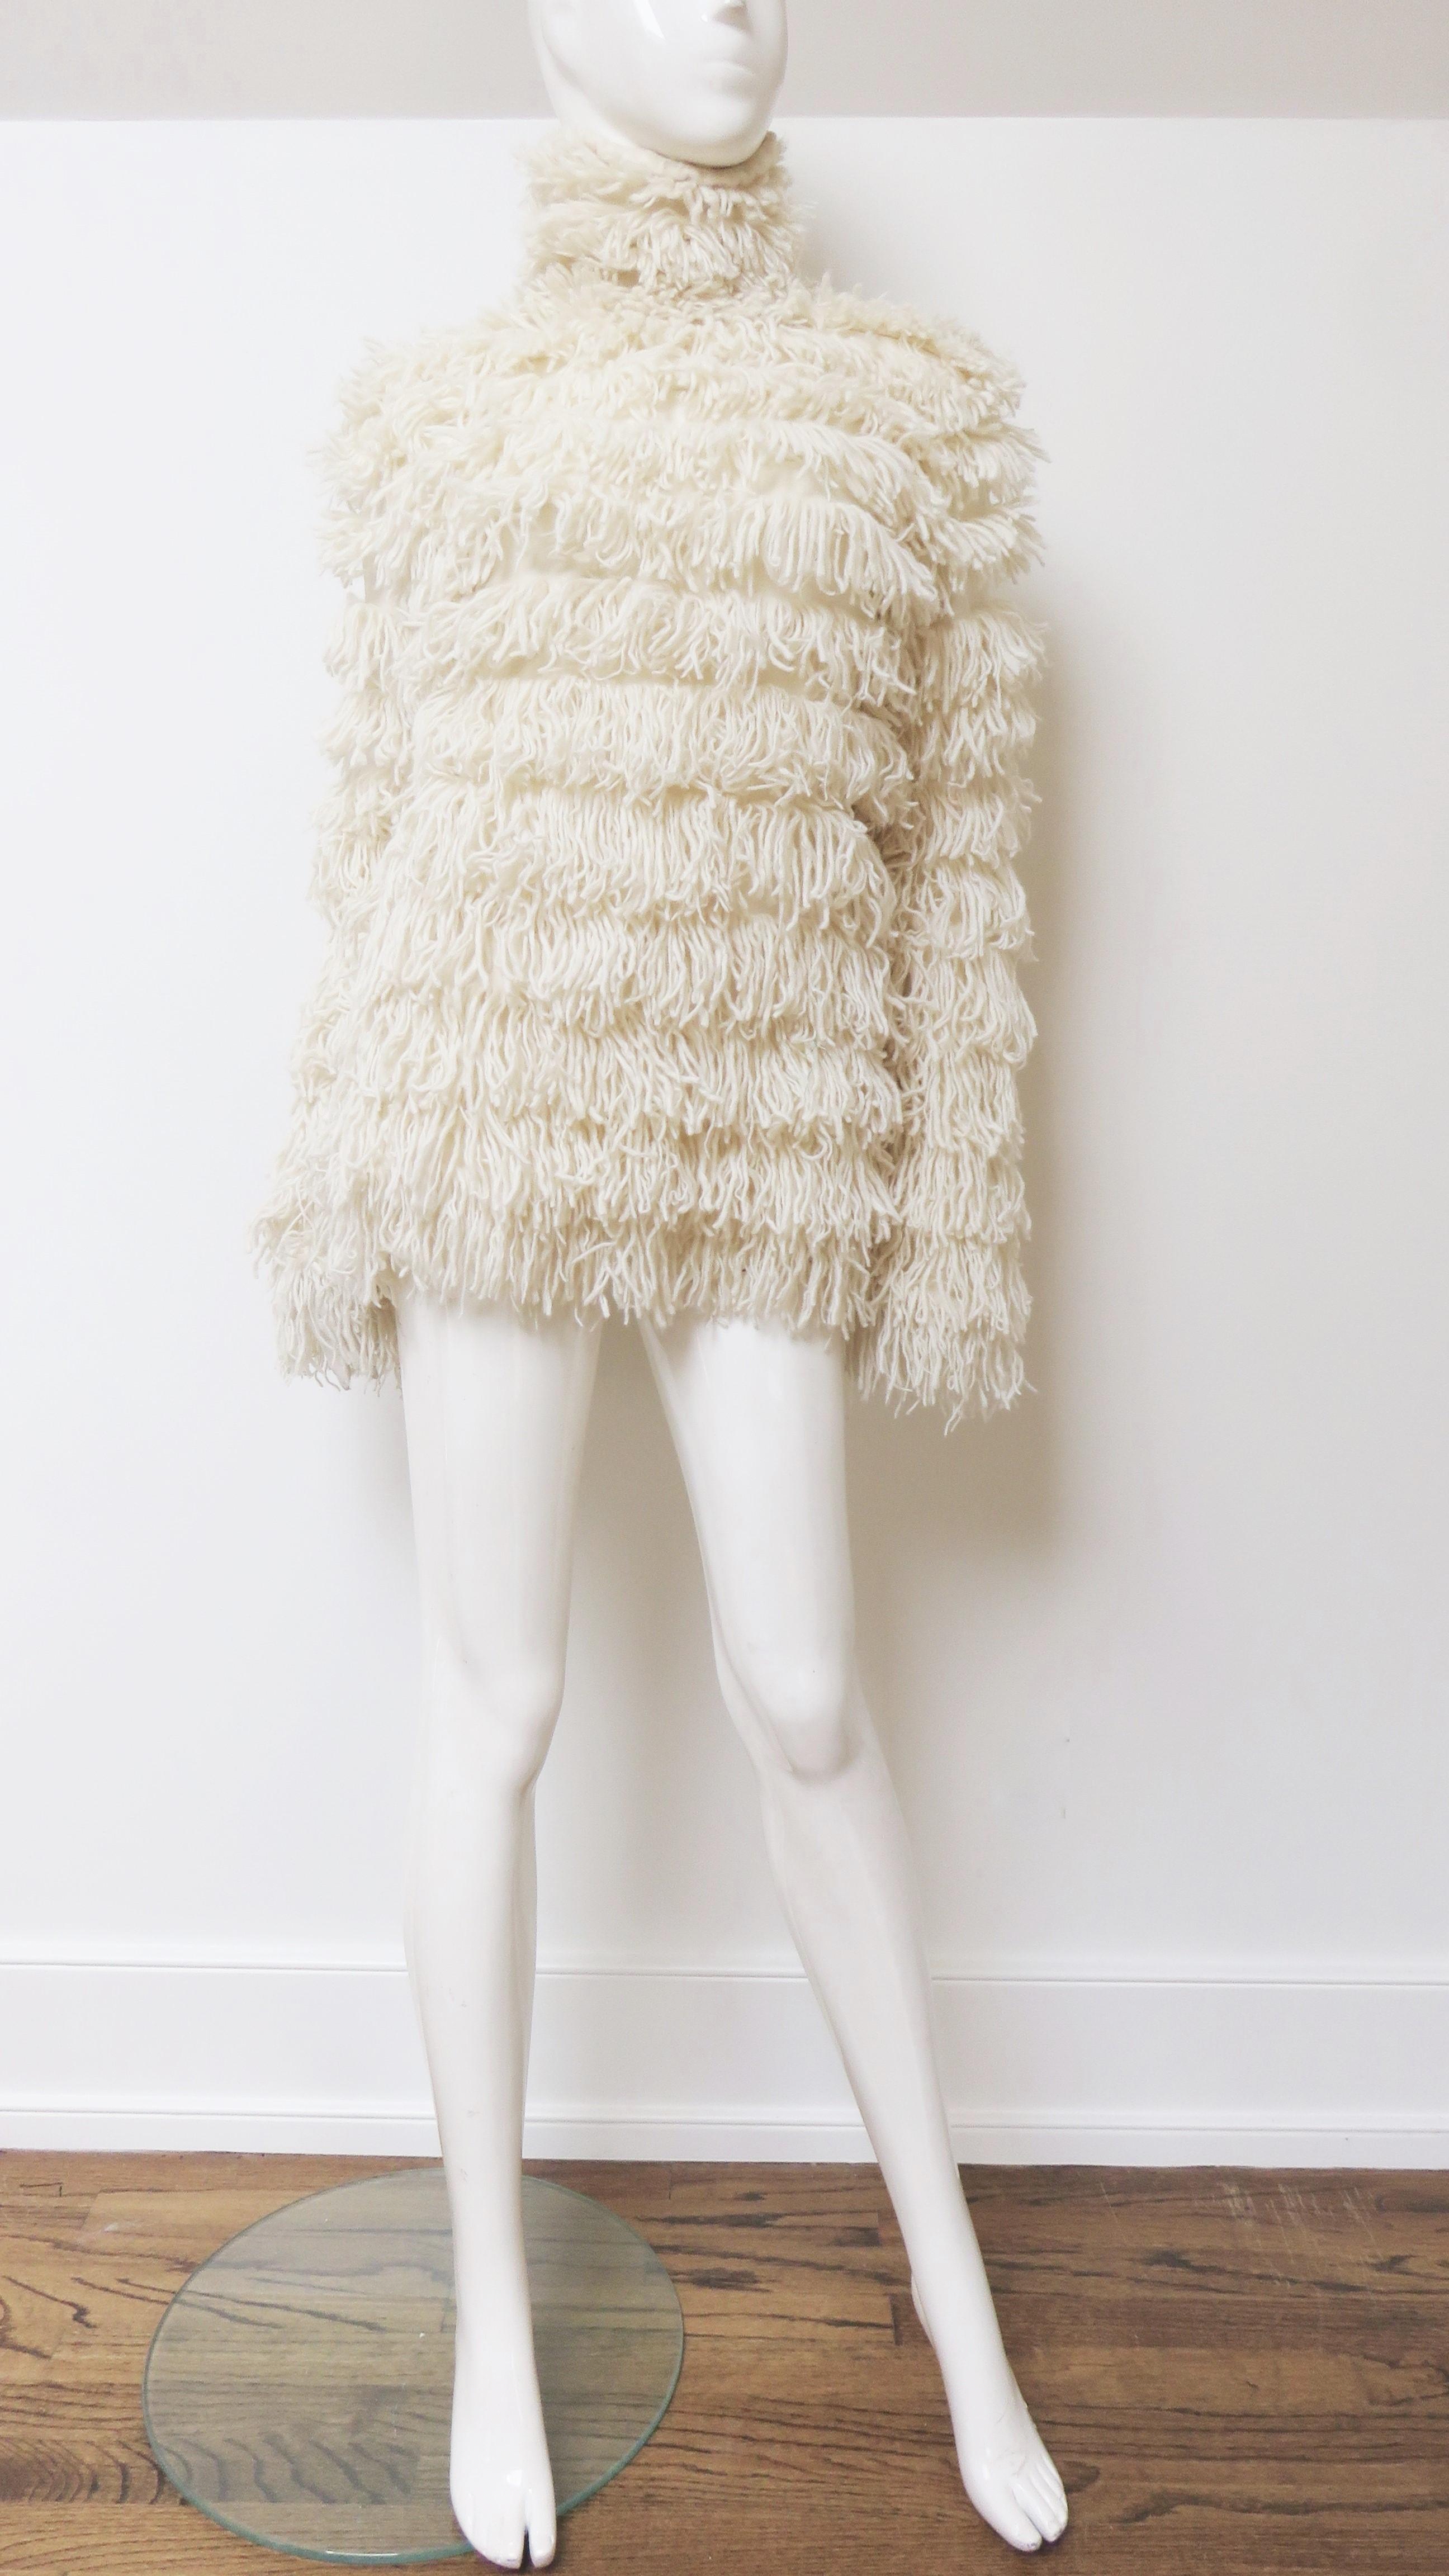 Alan Scott of Johnstons of Elgin Cashmere Sweater with Fringe In Good Condition For Sale In Water Mill, NY